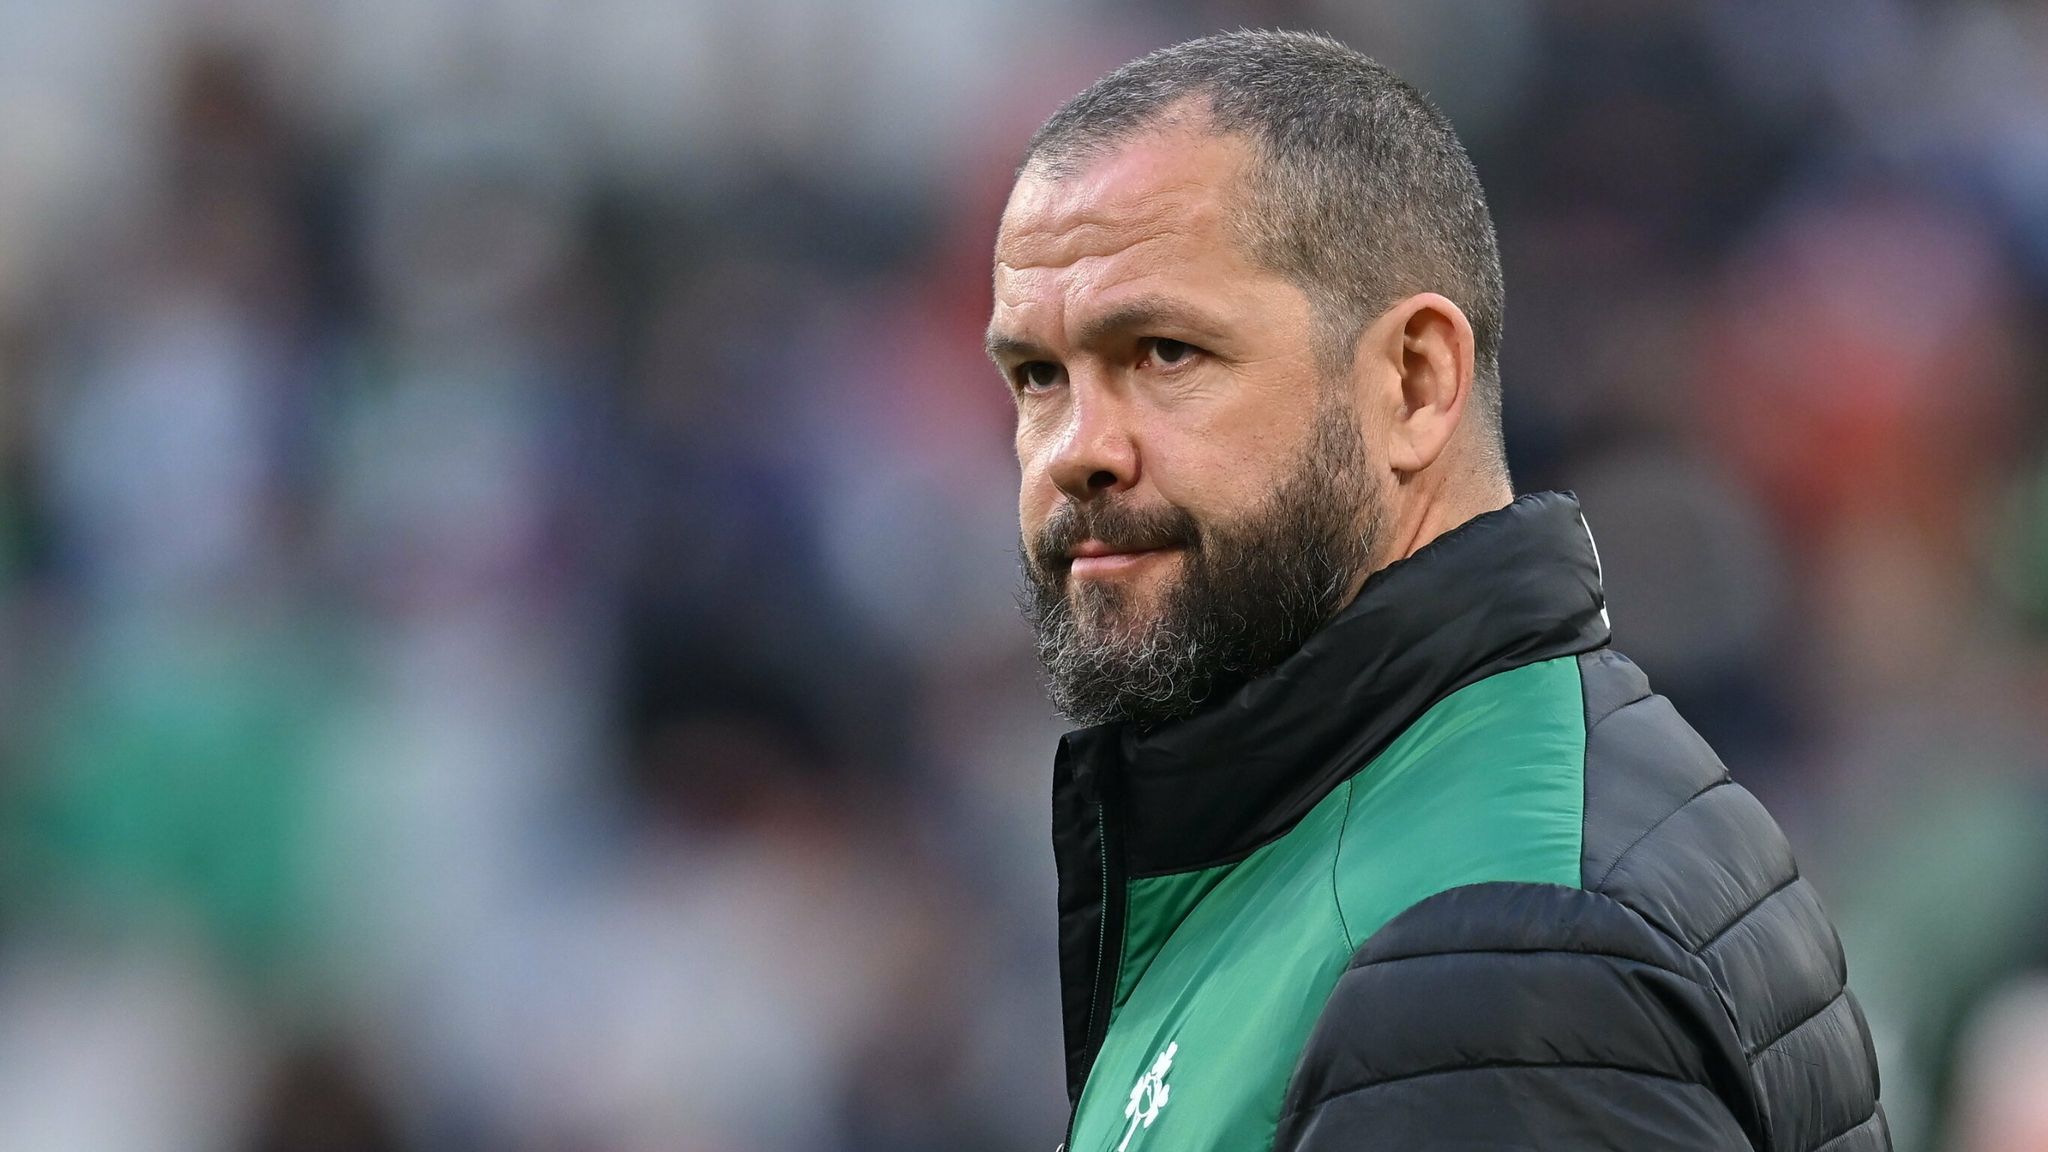 Maori All Blacks vs Ireland on Sky Sports Andy Farrell says his side face the biggest game of their lives Rugby Union News Sky Sports